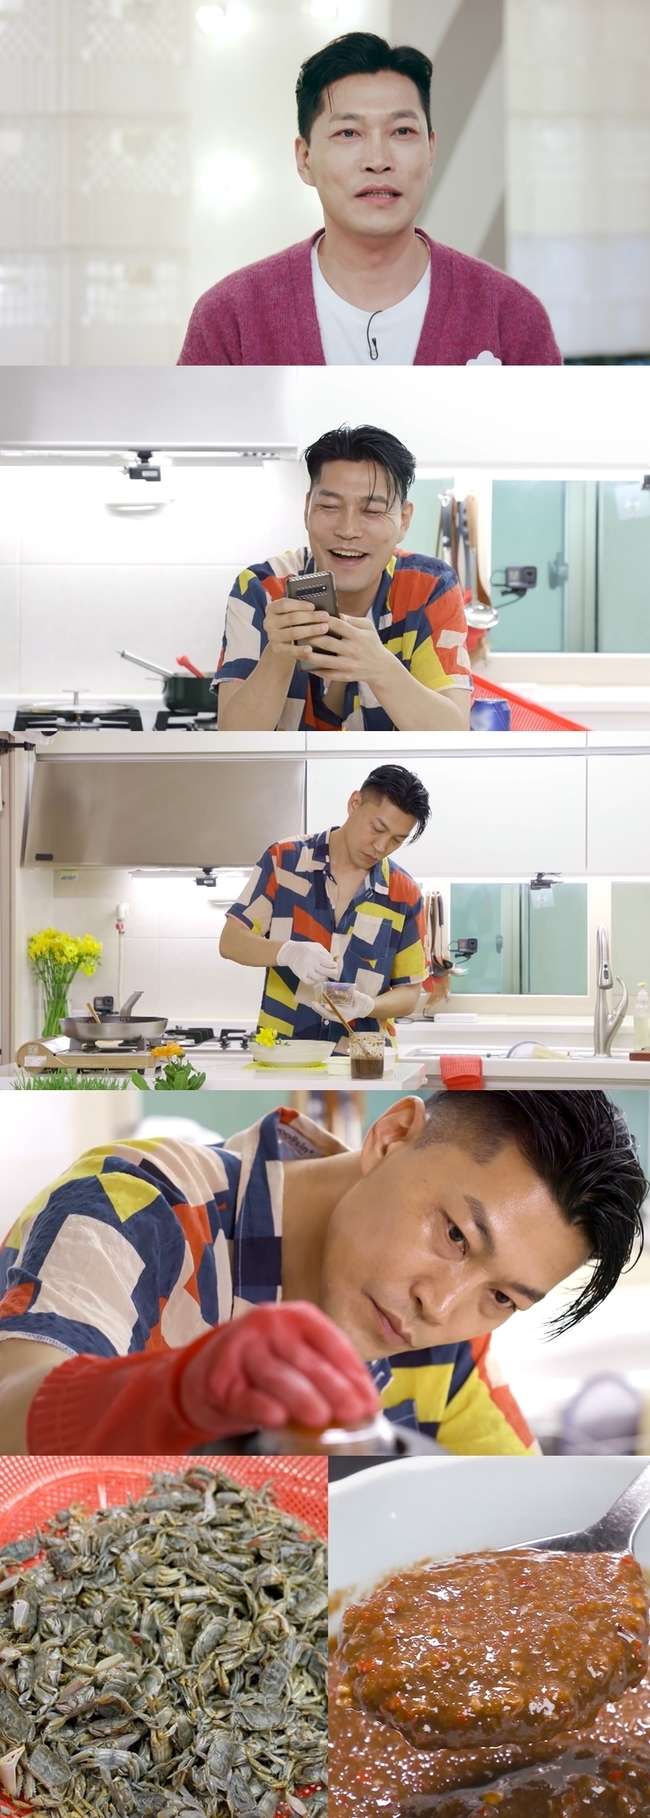 Actor Choi Gwi-hwa shows off his anti-war charmOn June 2, KBS 2TV  ⁇  Stars Top Recipe at Fun-Staurant  ⁇  ( ⁇  Stars Top Recipe at Fun-Staurant  ⁇ ) will be the first appearance of the new chef Choi Gwi-hwa.In the VCR, Choi Gwi-hwa headed to the kitchen after a wild homecoming as soon as she woke up. This is when the reversal began.Choi Gwi-hwa, who does not leave a smile on his face while exchanging messages with Wife, said, Stars Top Recipe at Fun-Staurant  ⁇  The family is still like a honeymoon. He said.Choi Gwi-hwas cooking skills were reversed. Choi Gwi-hwas ingredients were japanese rock crab.Choi Gwi-hwa is my favorite, while everyone is wondering about some strange ingredients. I always boasted japanese rock crab as a food ingredient in my house.Choi Gwi-hwa, who first enjoyed japanese rock crab tempura like a snack, made chrysanthemum japonicum l. Chrysanthemum japonicum l. Chrysanthemum japonicum l. Chrysanthemum japonicum l. Chrysanthemum japonicum l.In particular, Choi Gwi-hwa has made countless chrysanthemum japonicum l., Which is based on his own accurate measurements and recipes.Then chrysanthemum japonicum l. I cooked simple rice dishes and noodles  ⁇  chrysanthemum japonicum l. I showed off the aspect of craftsmanship.The reason why Choi Gwi-hwa made chrysanthemum japonicum l. Was revealed and everyone listened again.